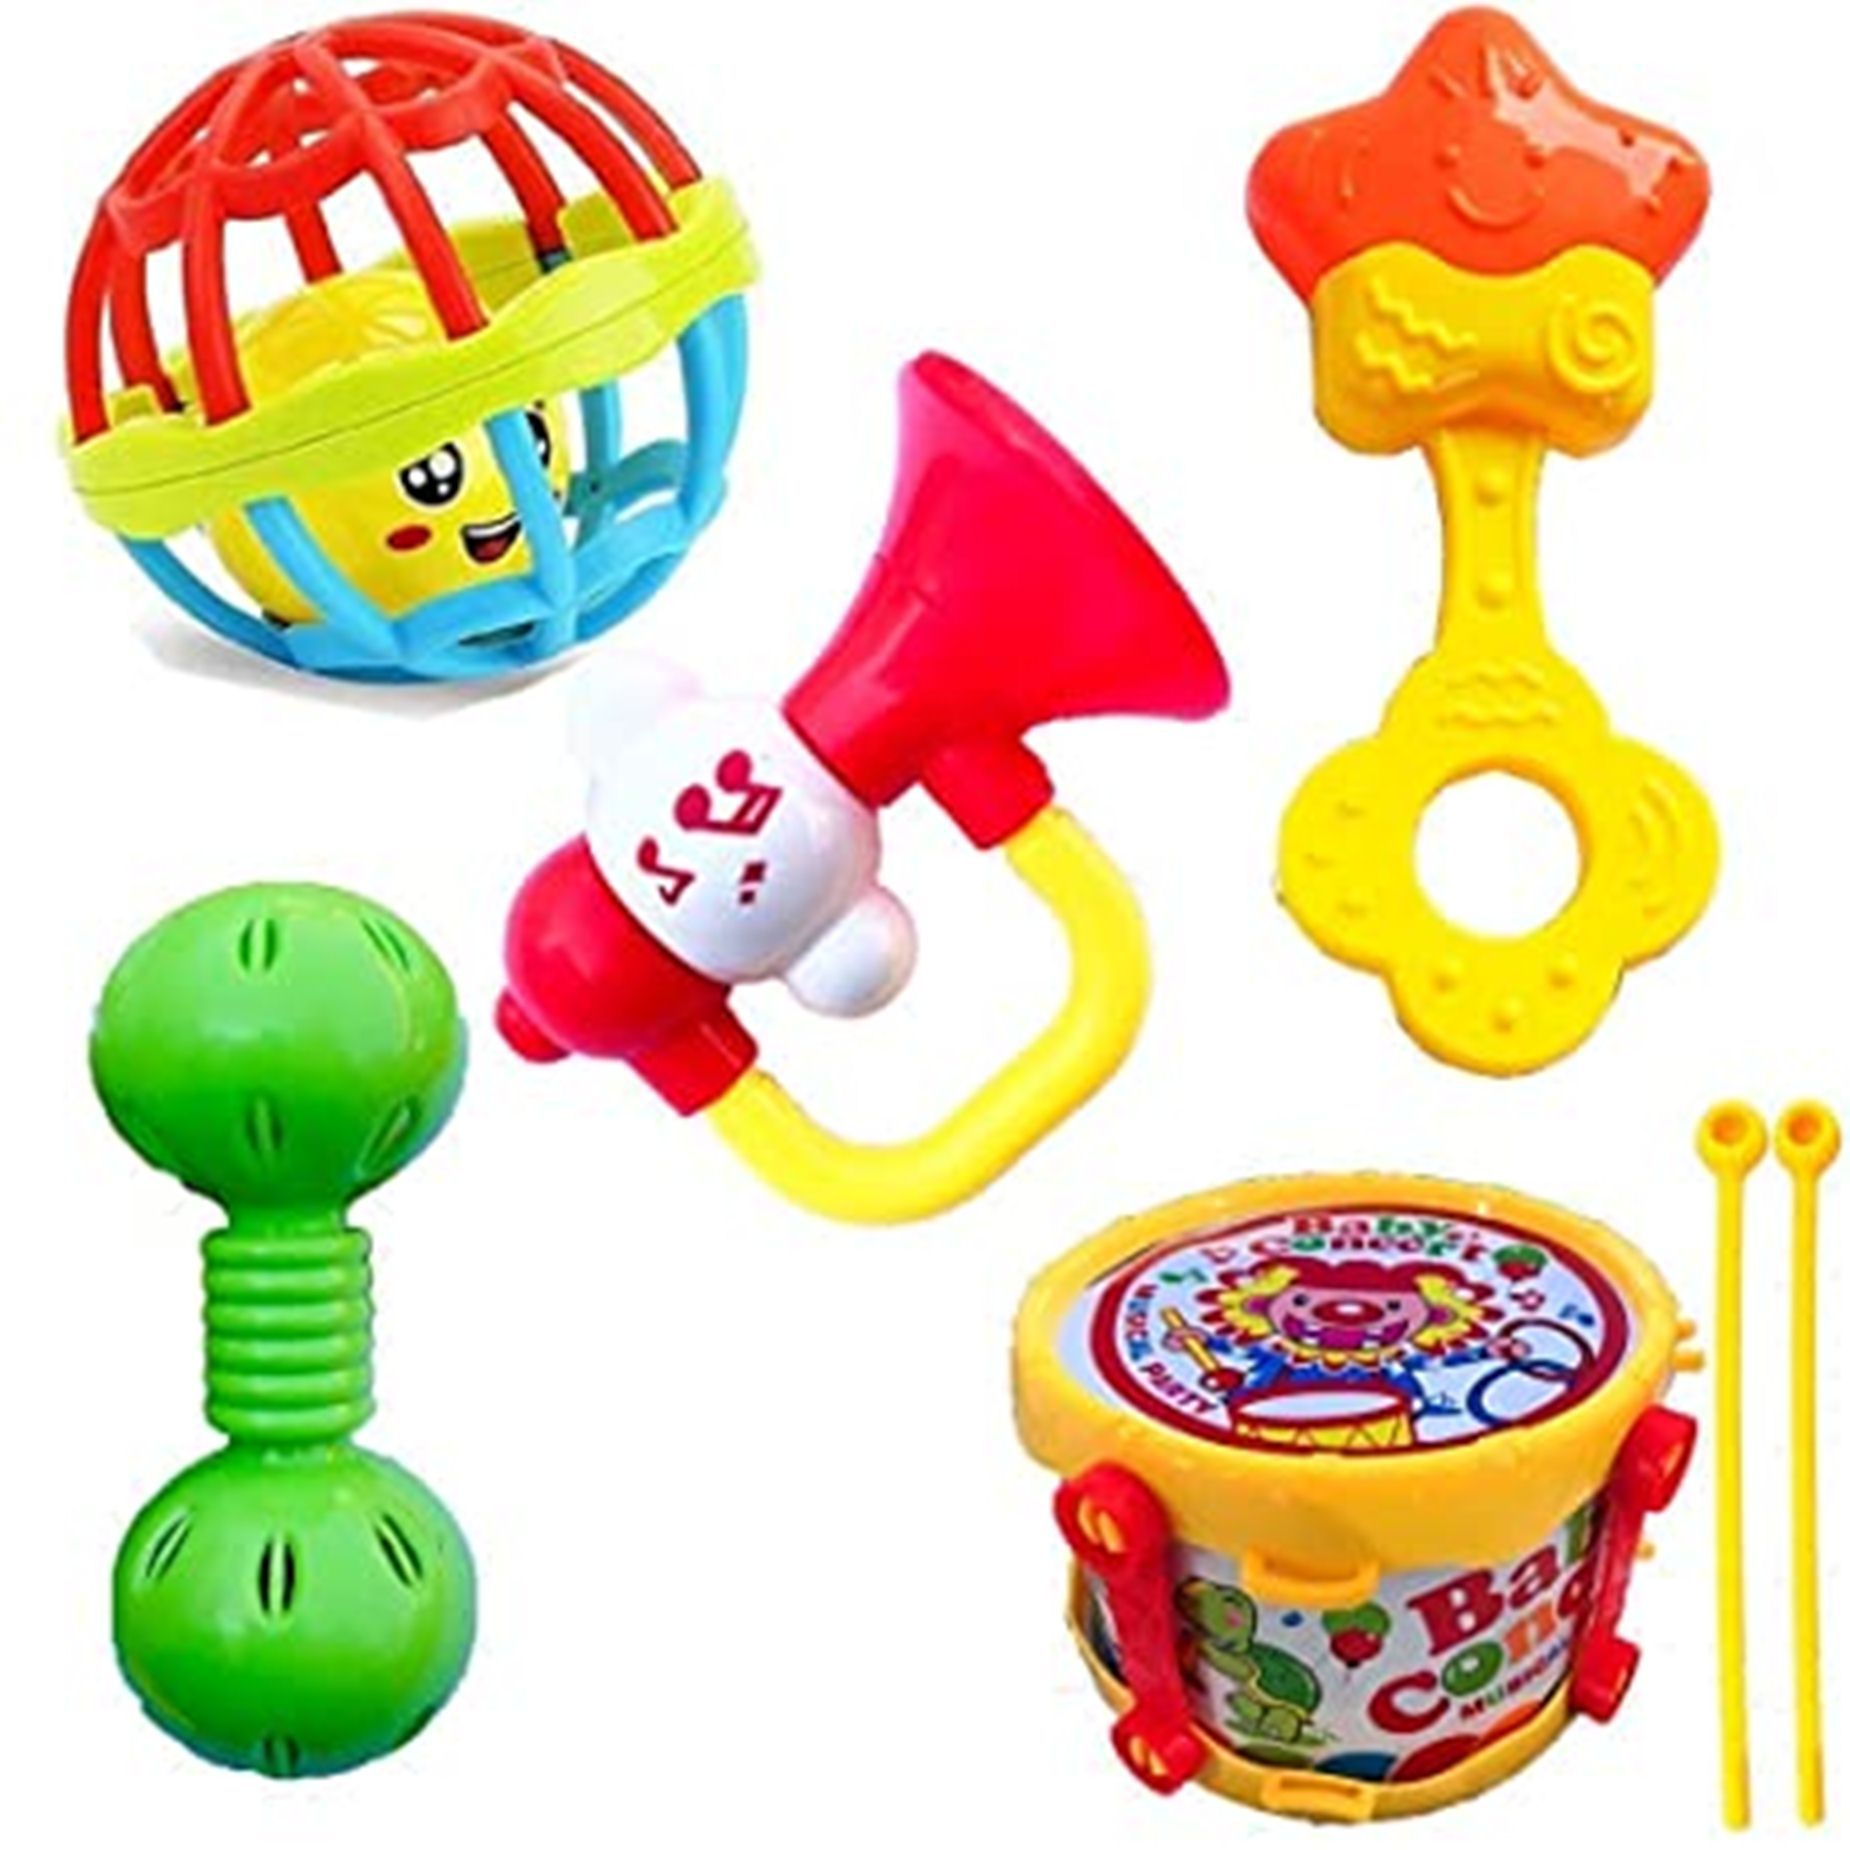 thriftkart Colorful Baby Rattle Tiys Set Toddlers for Infants Teether Drum Set Rattle Toys (Set of 5, Multicolor)